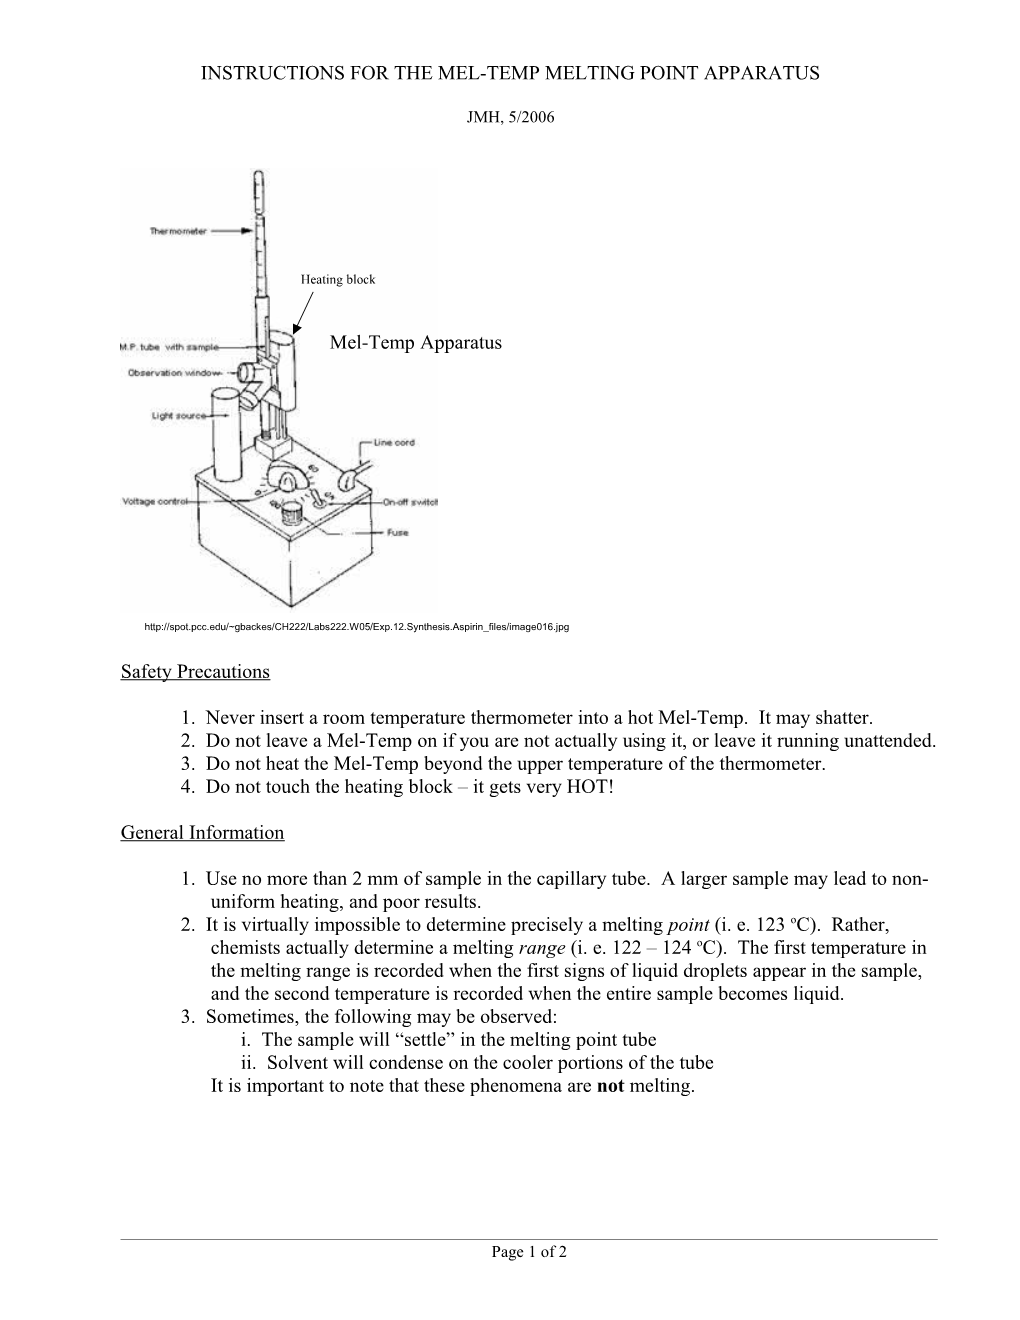 Instructions for the Mel-Temp Melting Point Apparatus